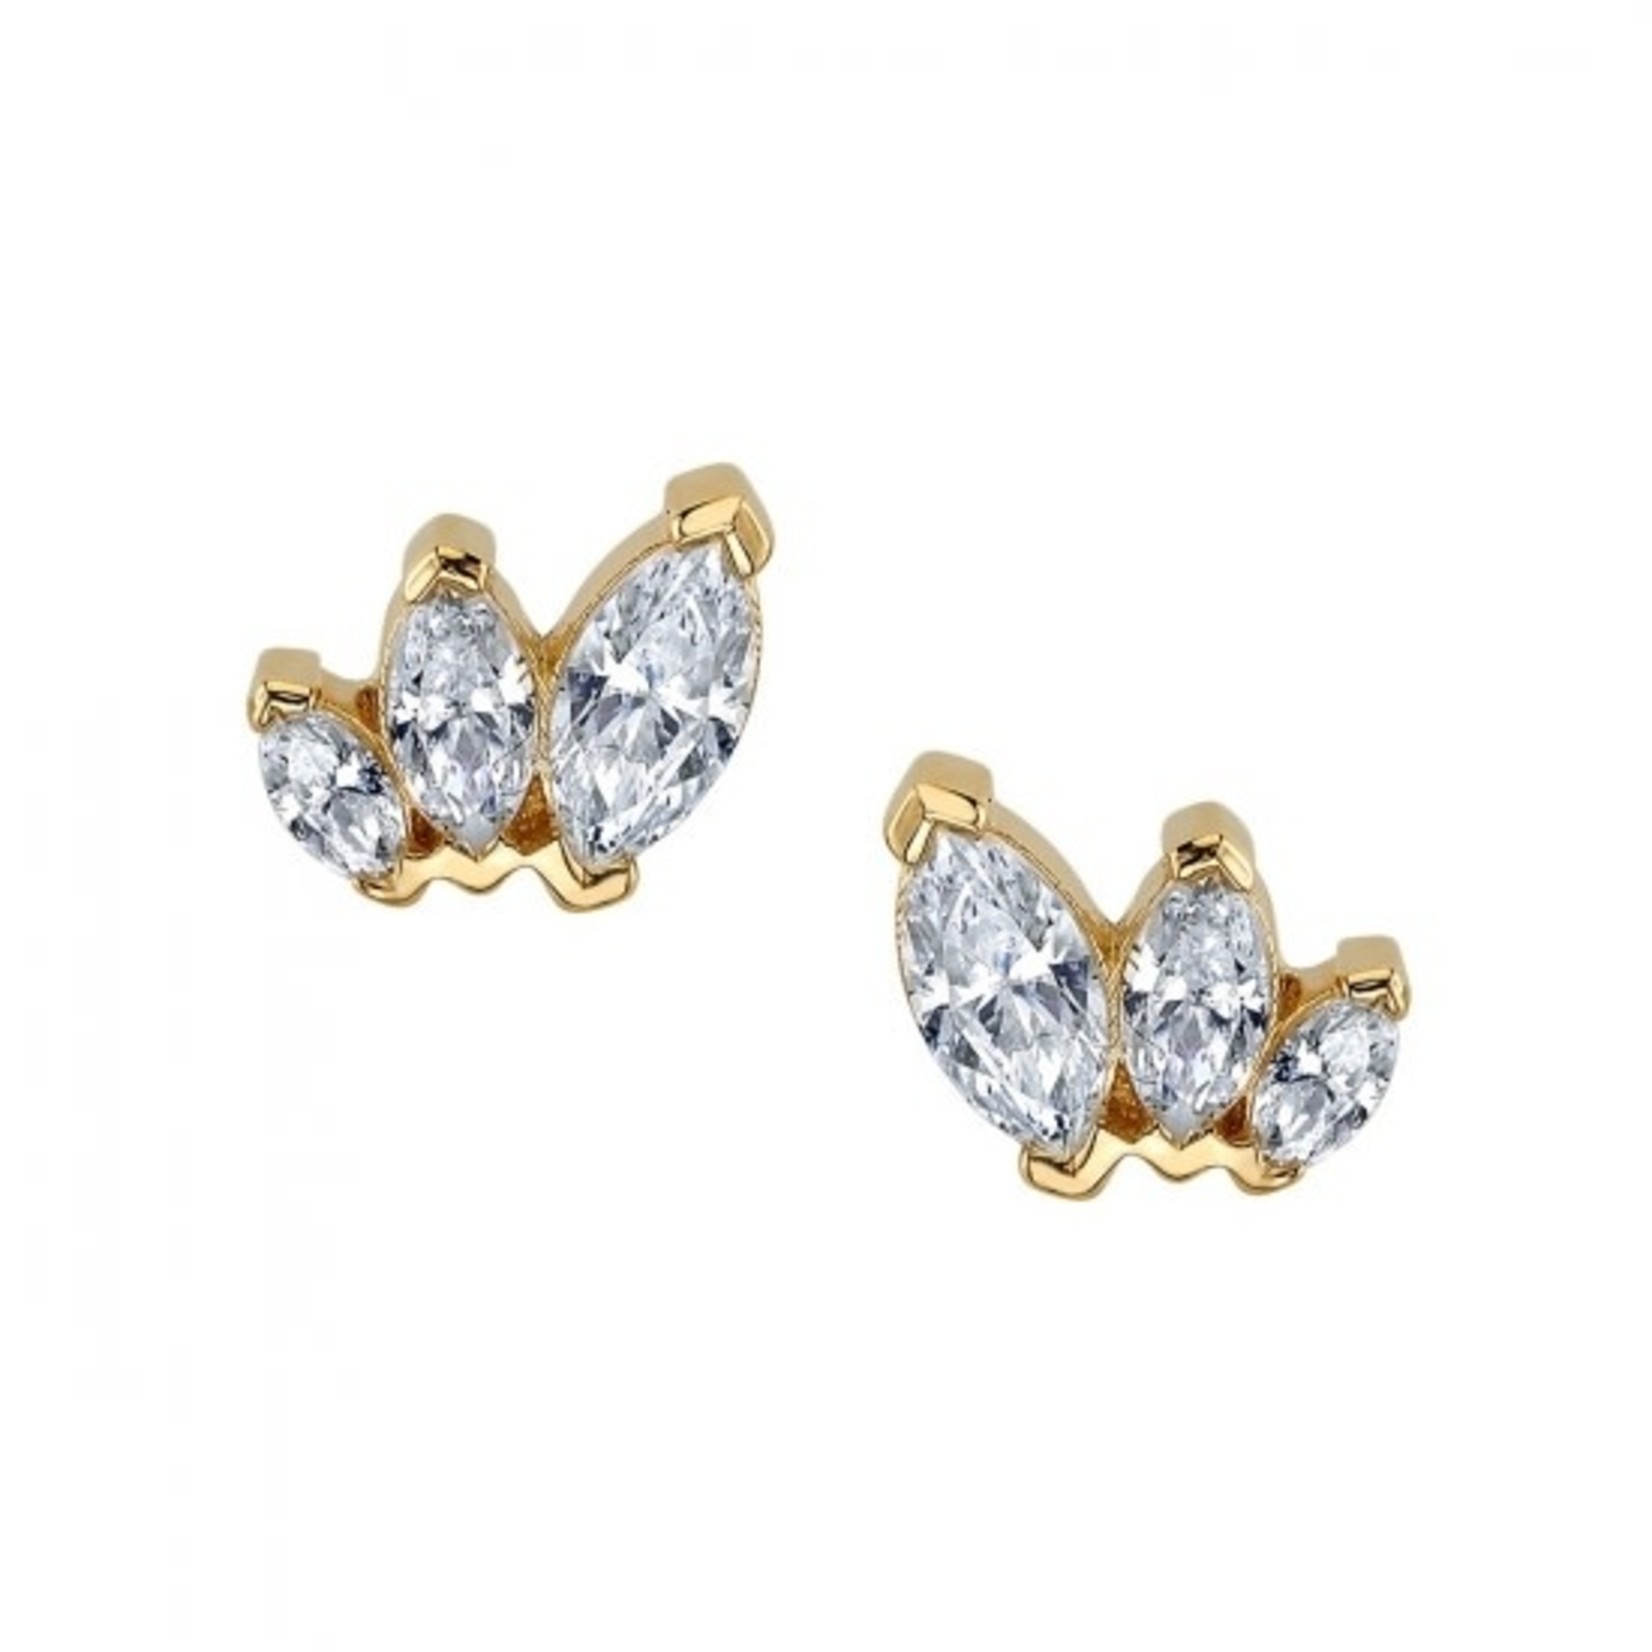 BVLA BVLA "Tiny French Kiss" threaded end with 2.5x1.25, 3x1.5, & 4x2 CZ marquise